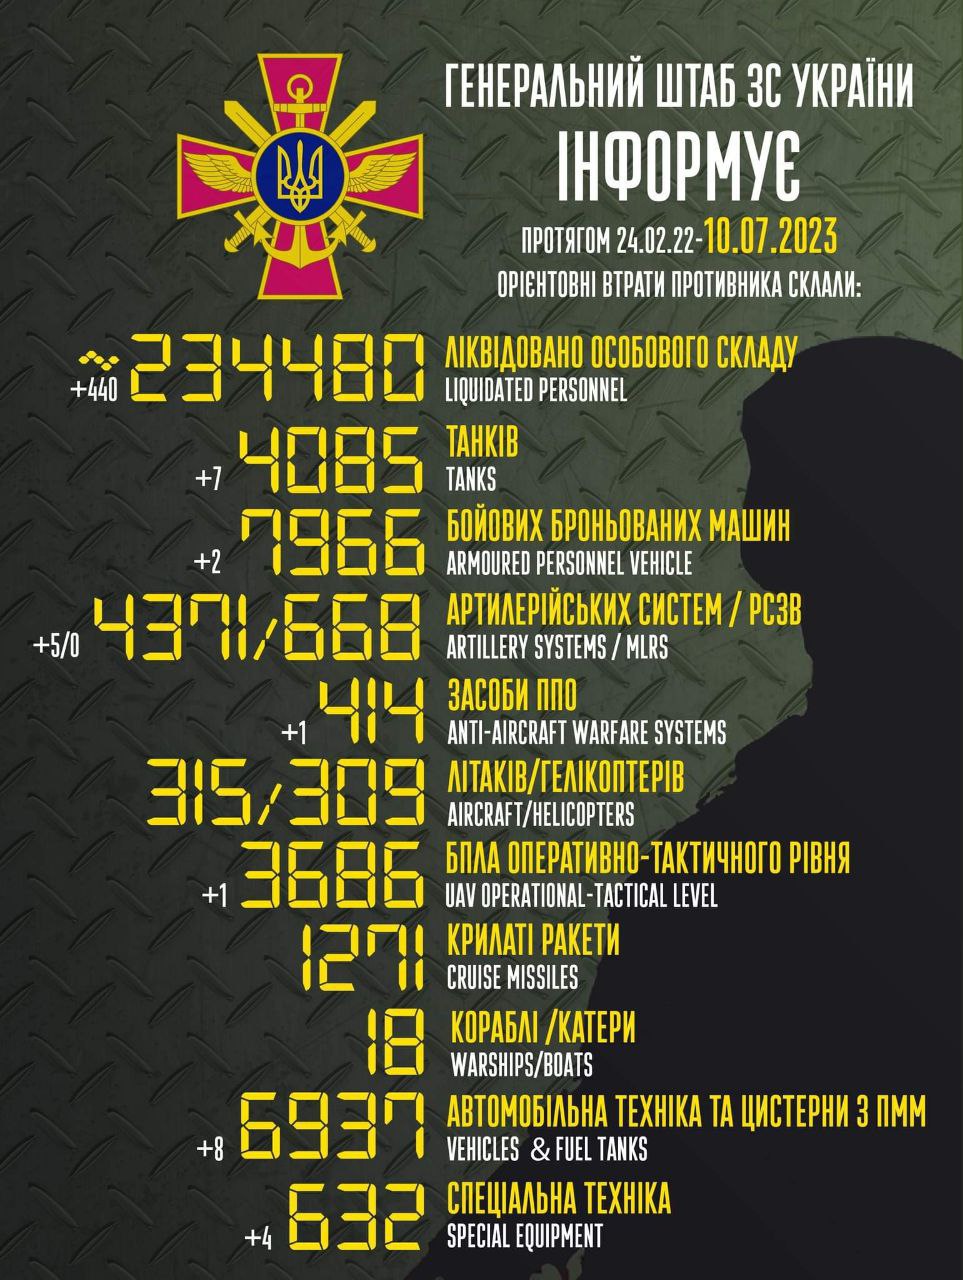 Total combat losses of the enemy from 24.02.2022 to 10.07.2023